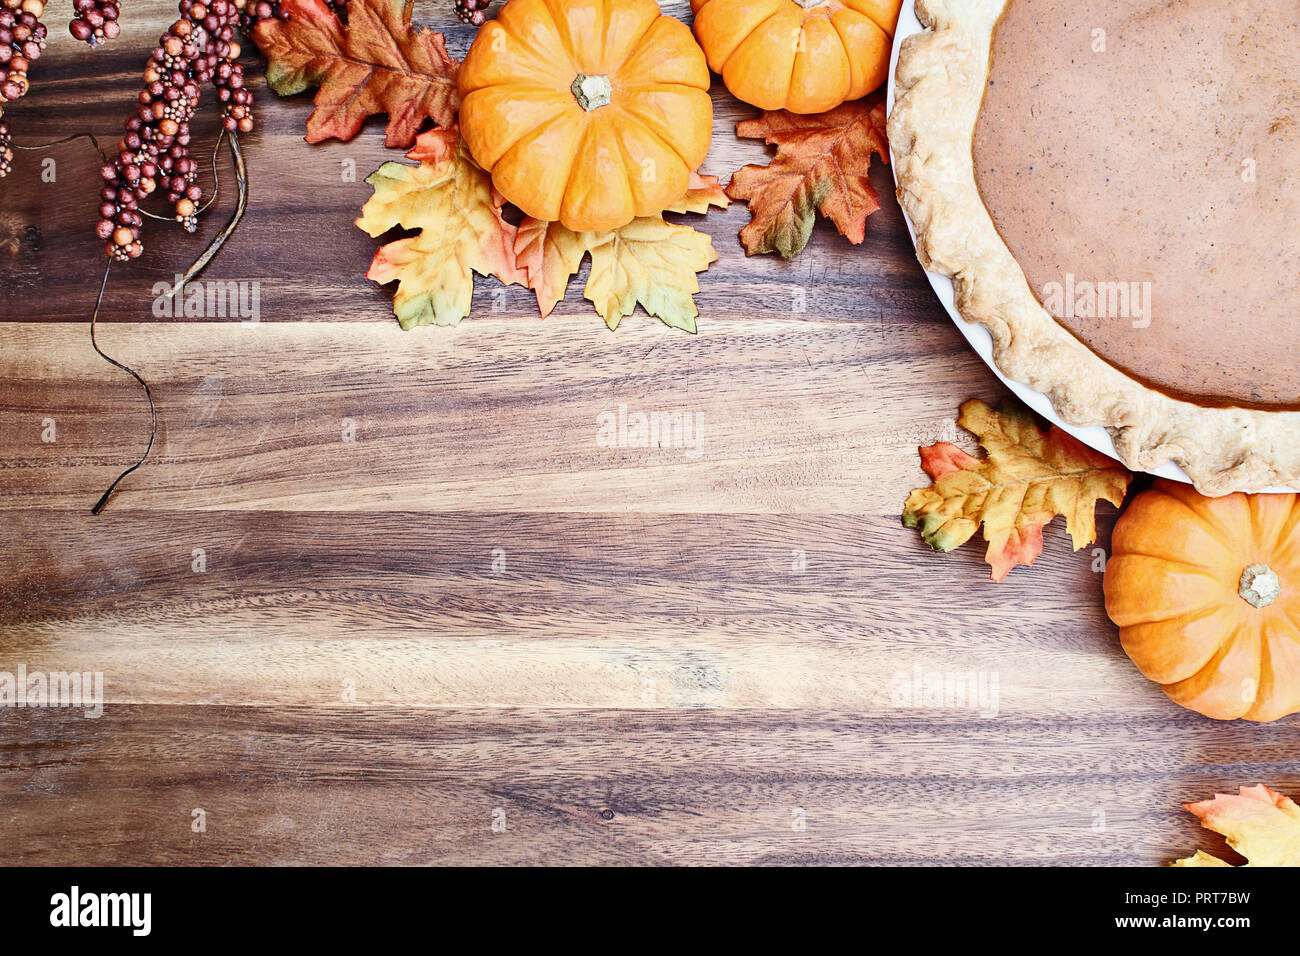 Homemade pumpkin pie in pie plate with little pumpkins, autumn leaves and room for text over rustic wooden background. Image shot from overhead. Stock Photo